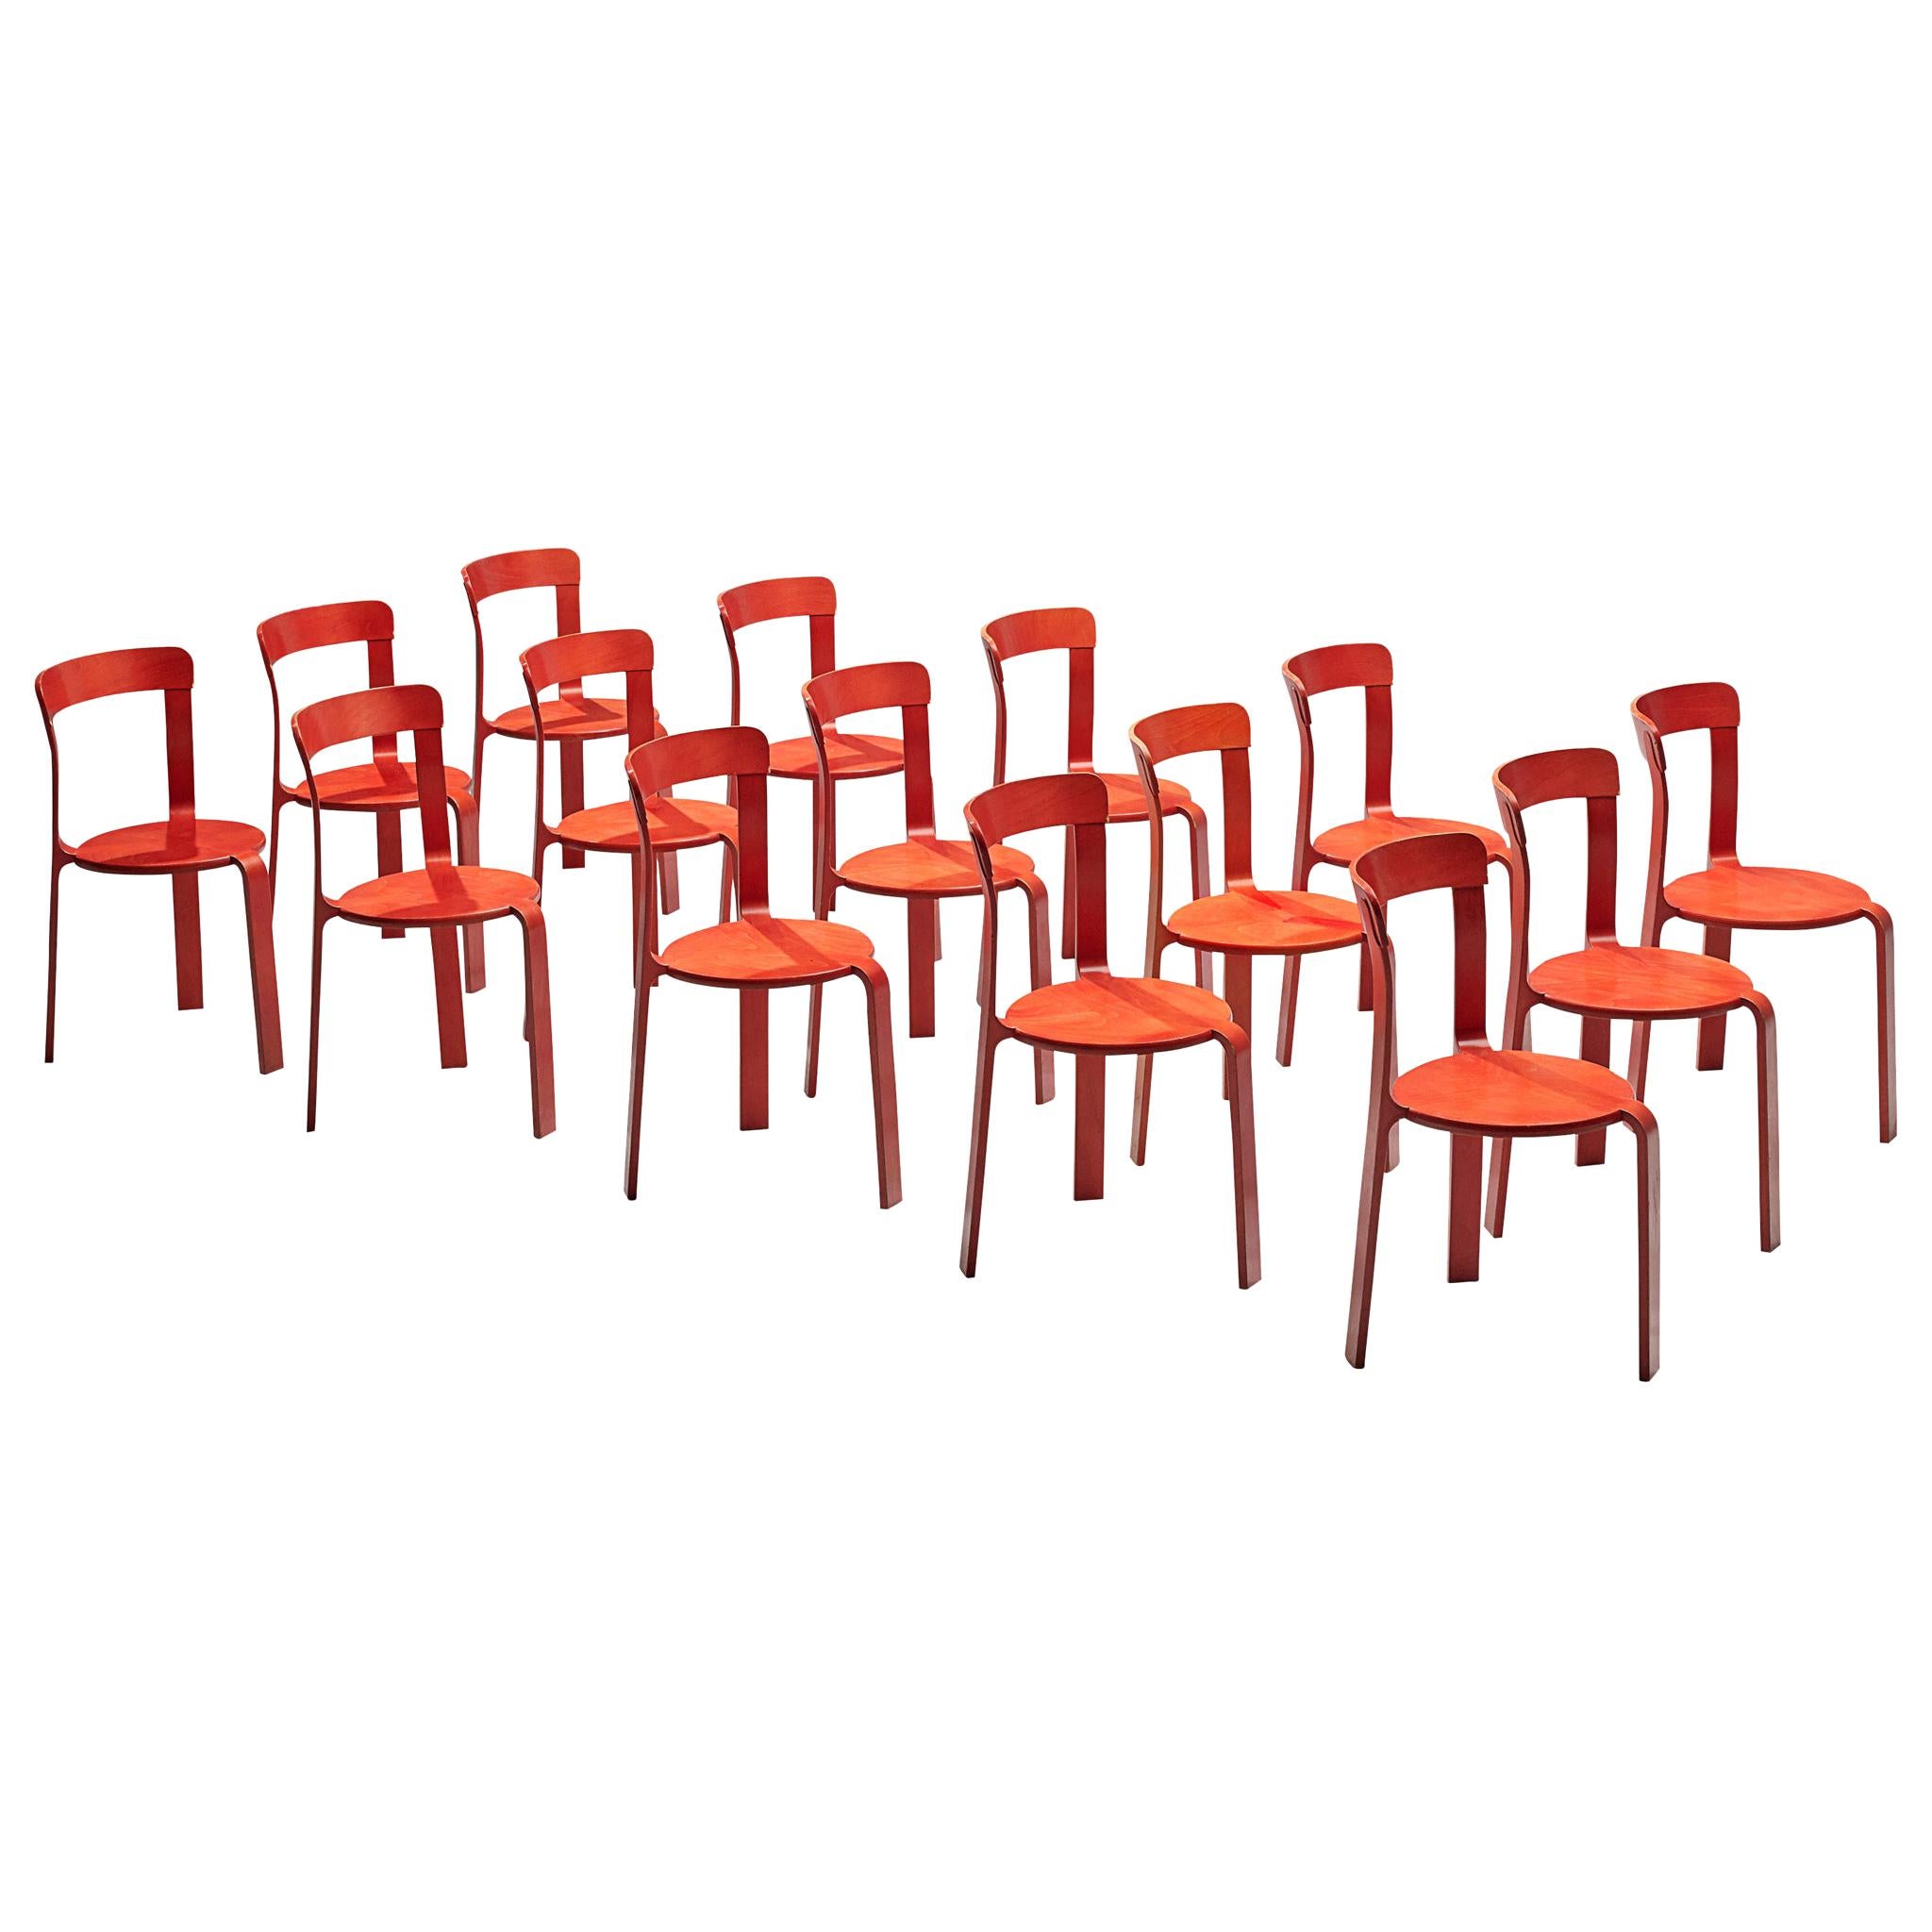 Bruno Rey for Dietiker Chairs in Red Plywood, 1970s